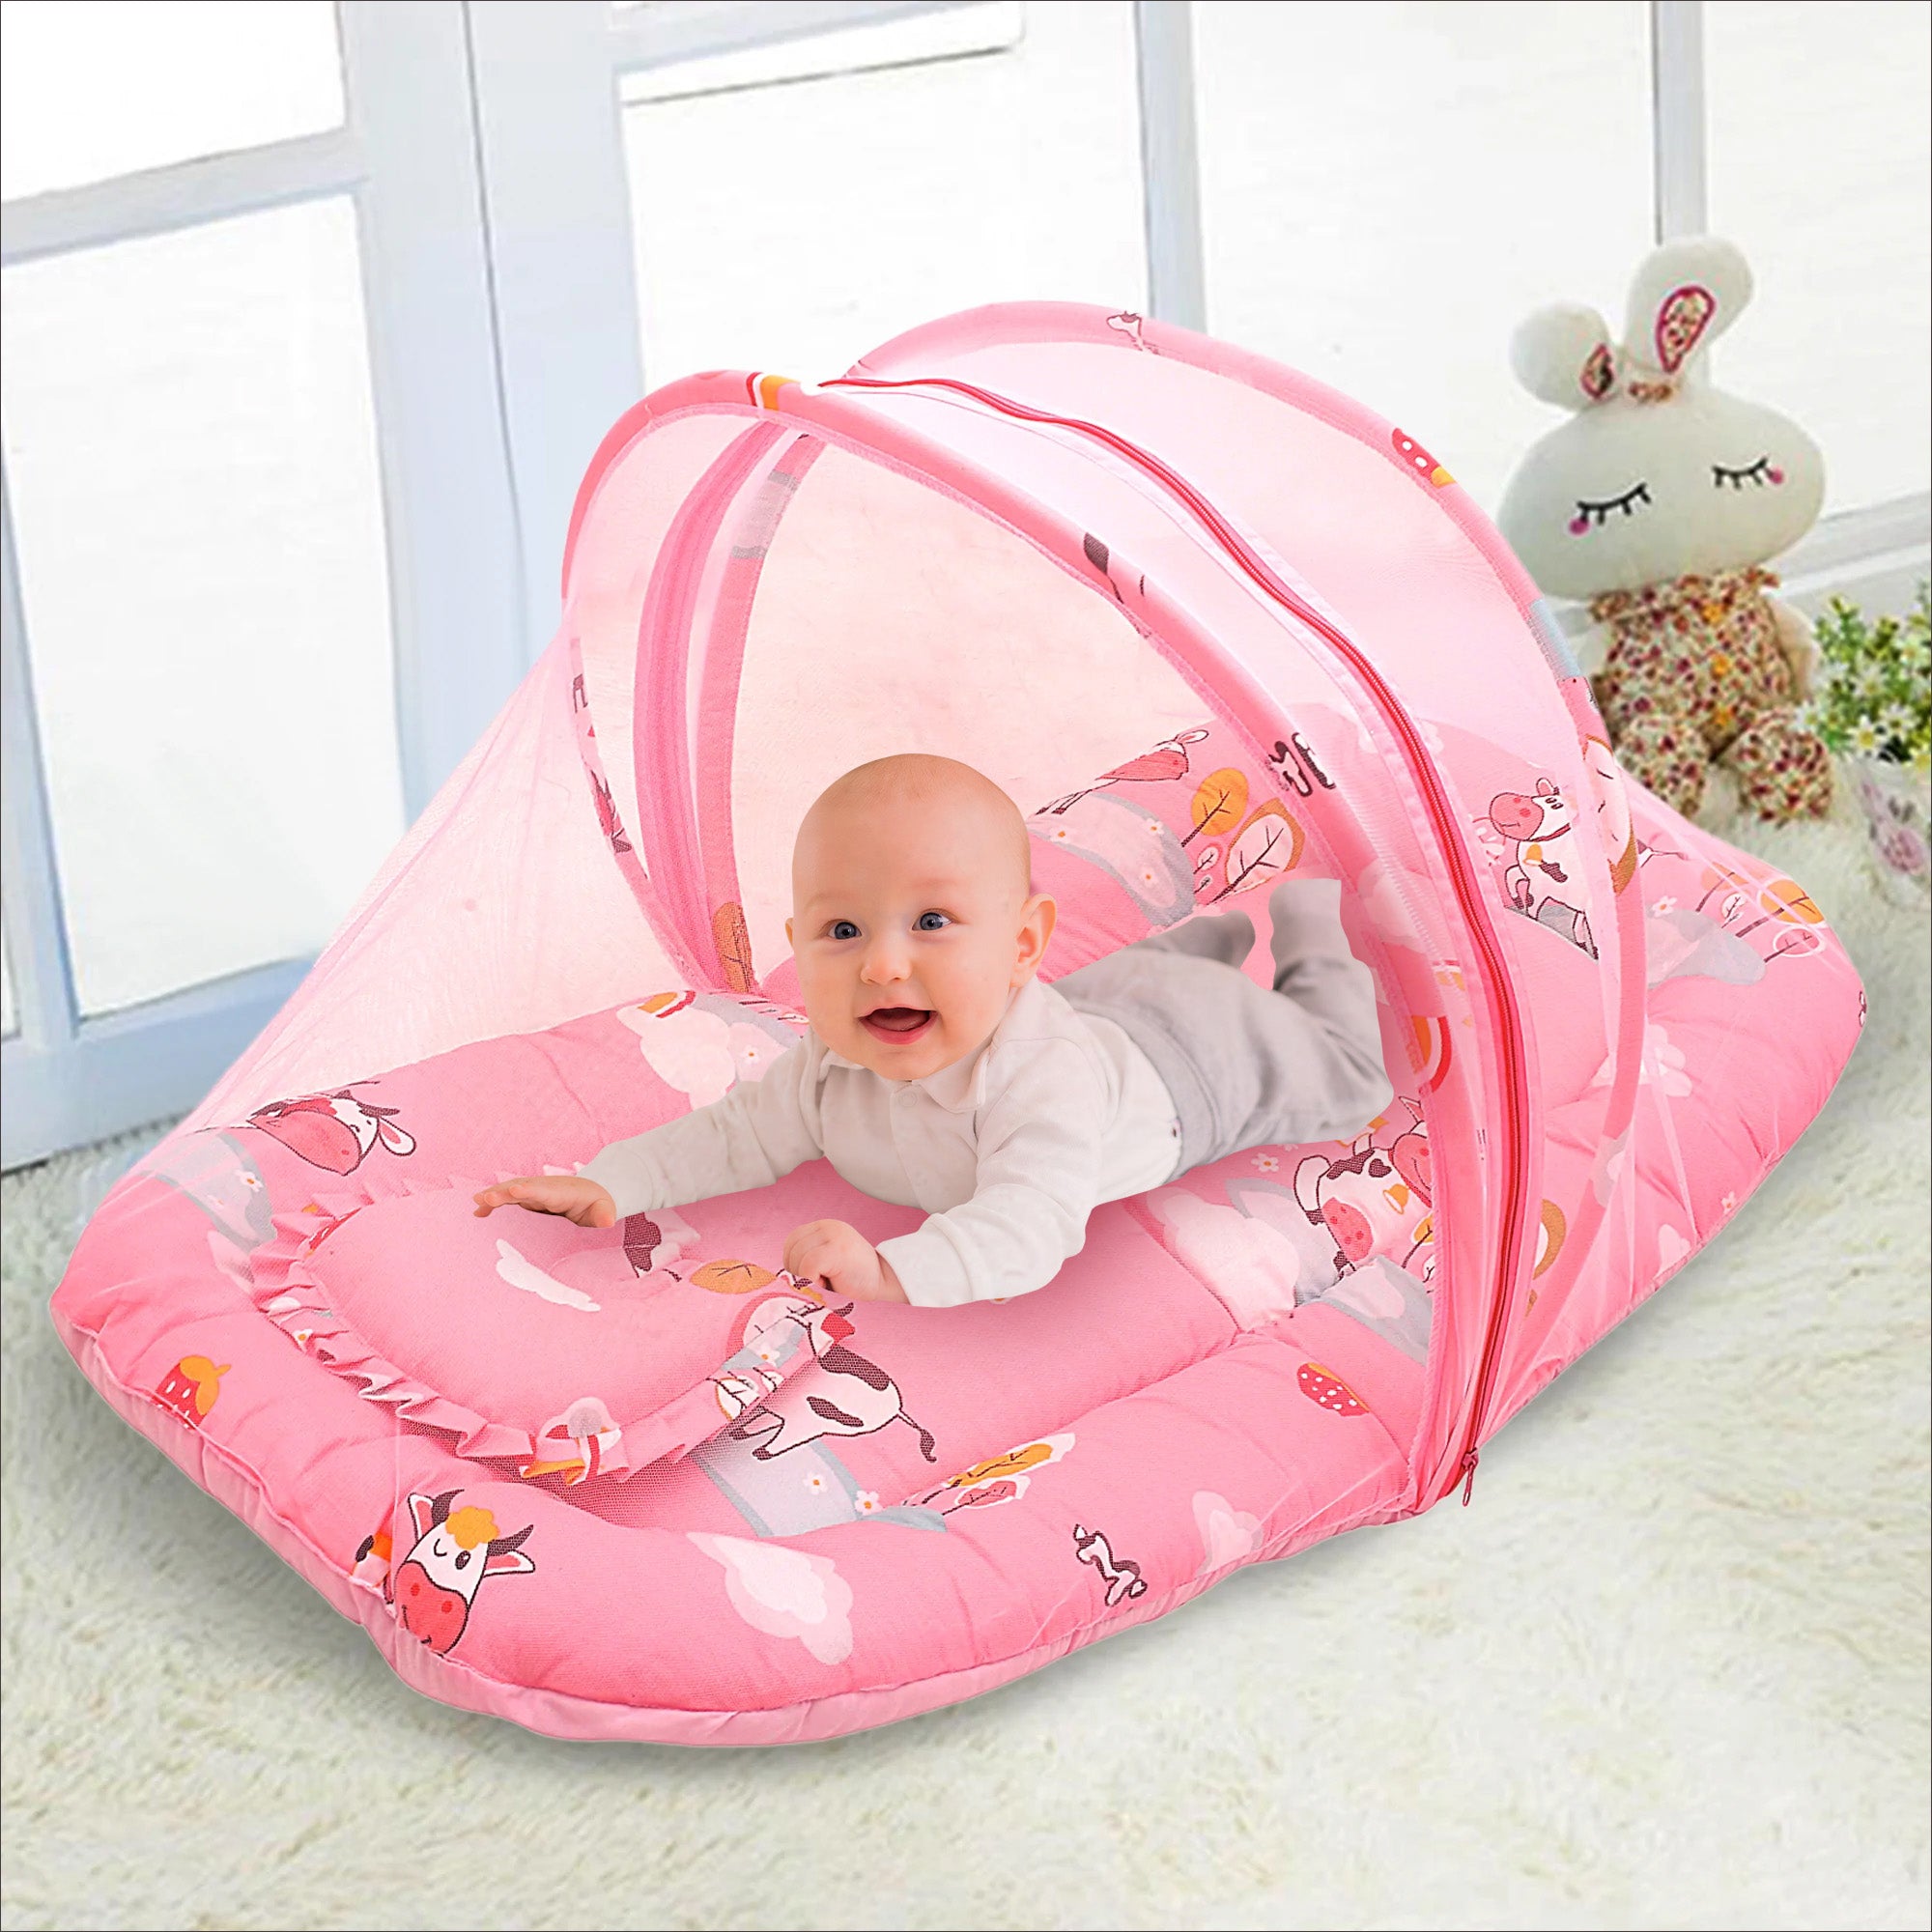 Baby mattress with net for your baby's comfortable and mosquito